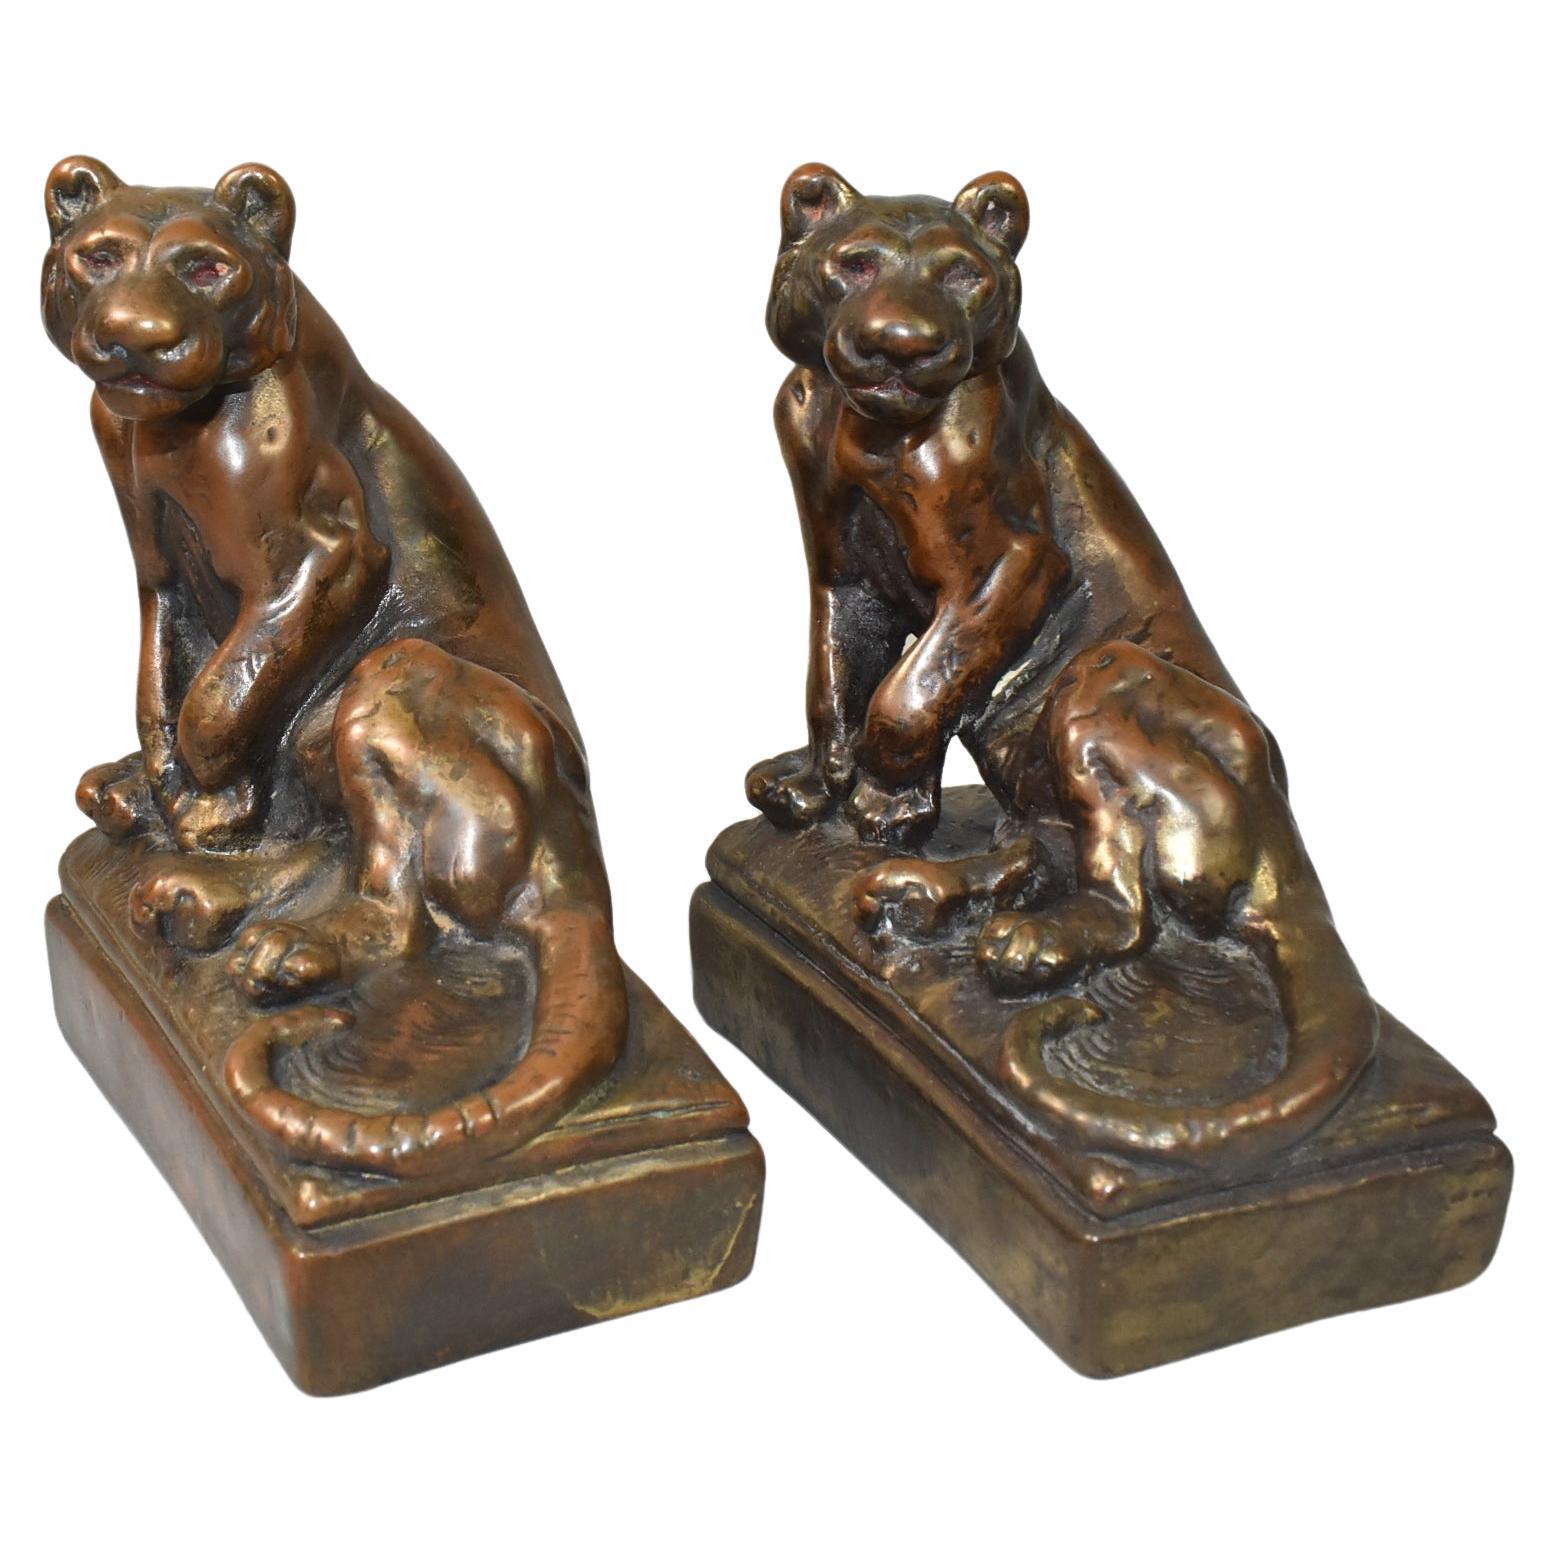 Bronze Clad Lion/Tiger Bookends, Attributed to Pompeian by Paul Herzel